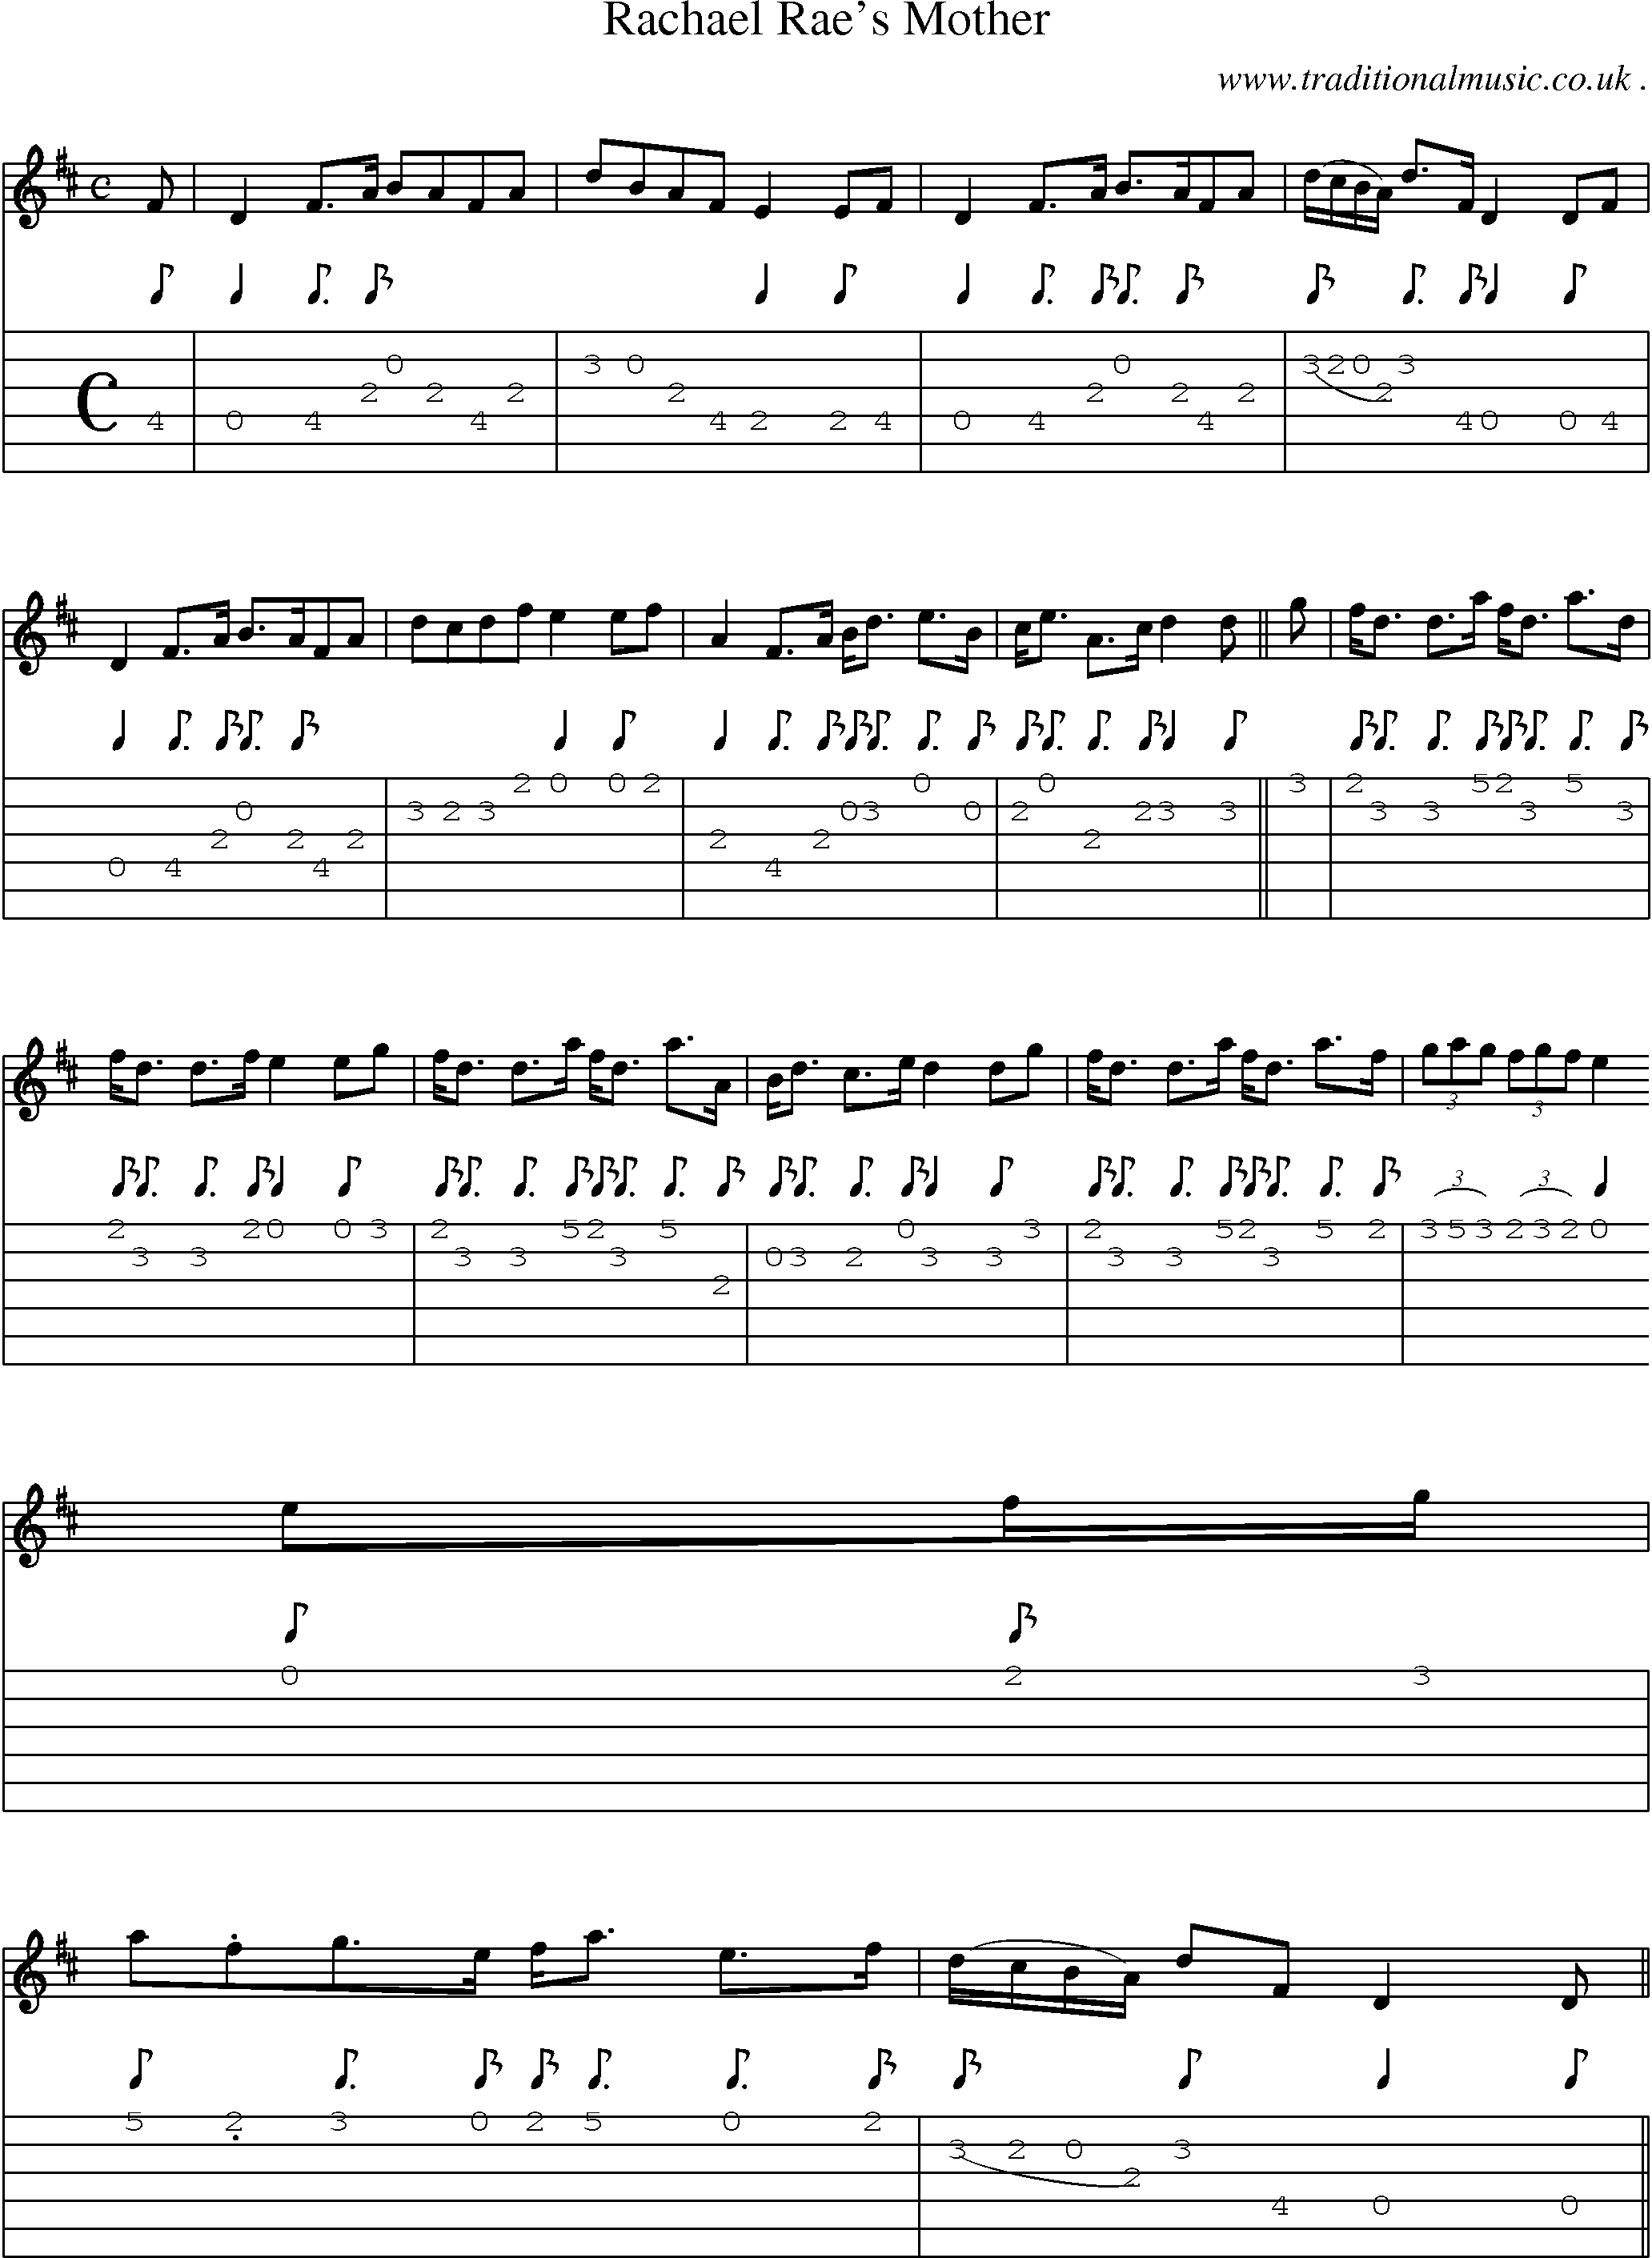 Sheet-music  score, Chords and Guitar Tabs for Rachael Raes Mother